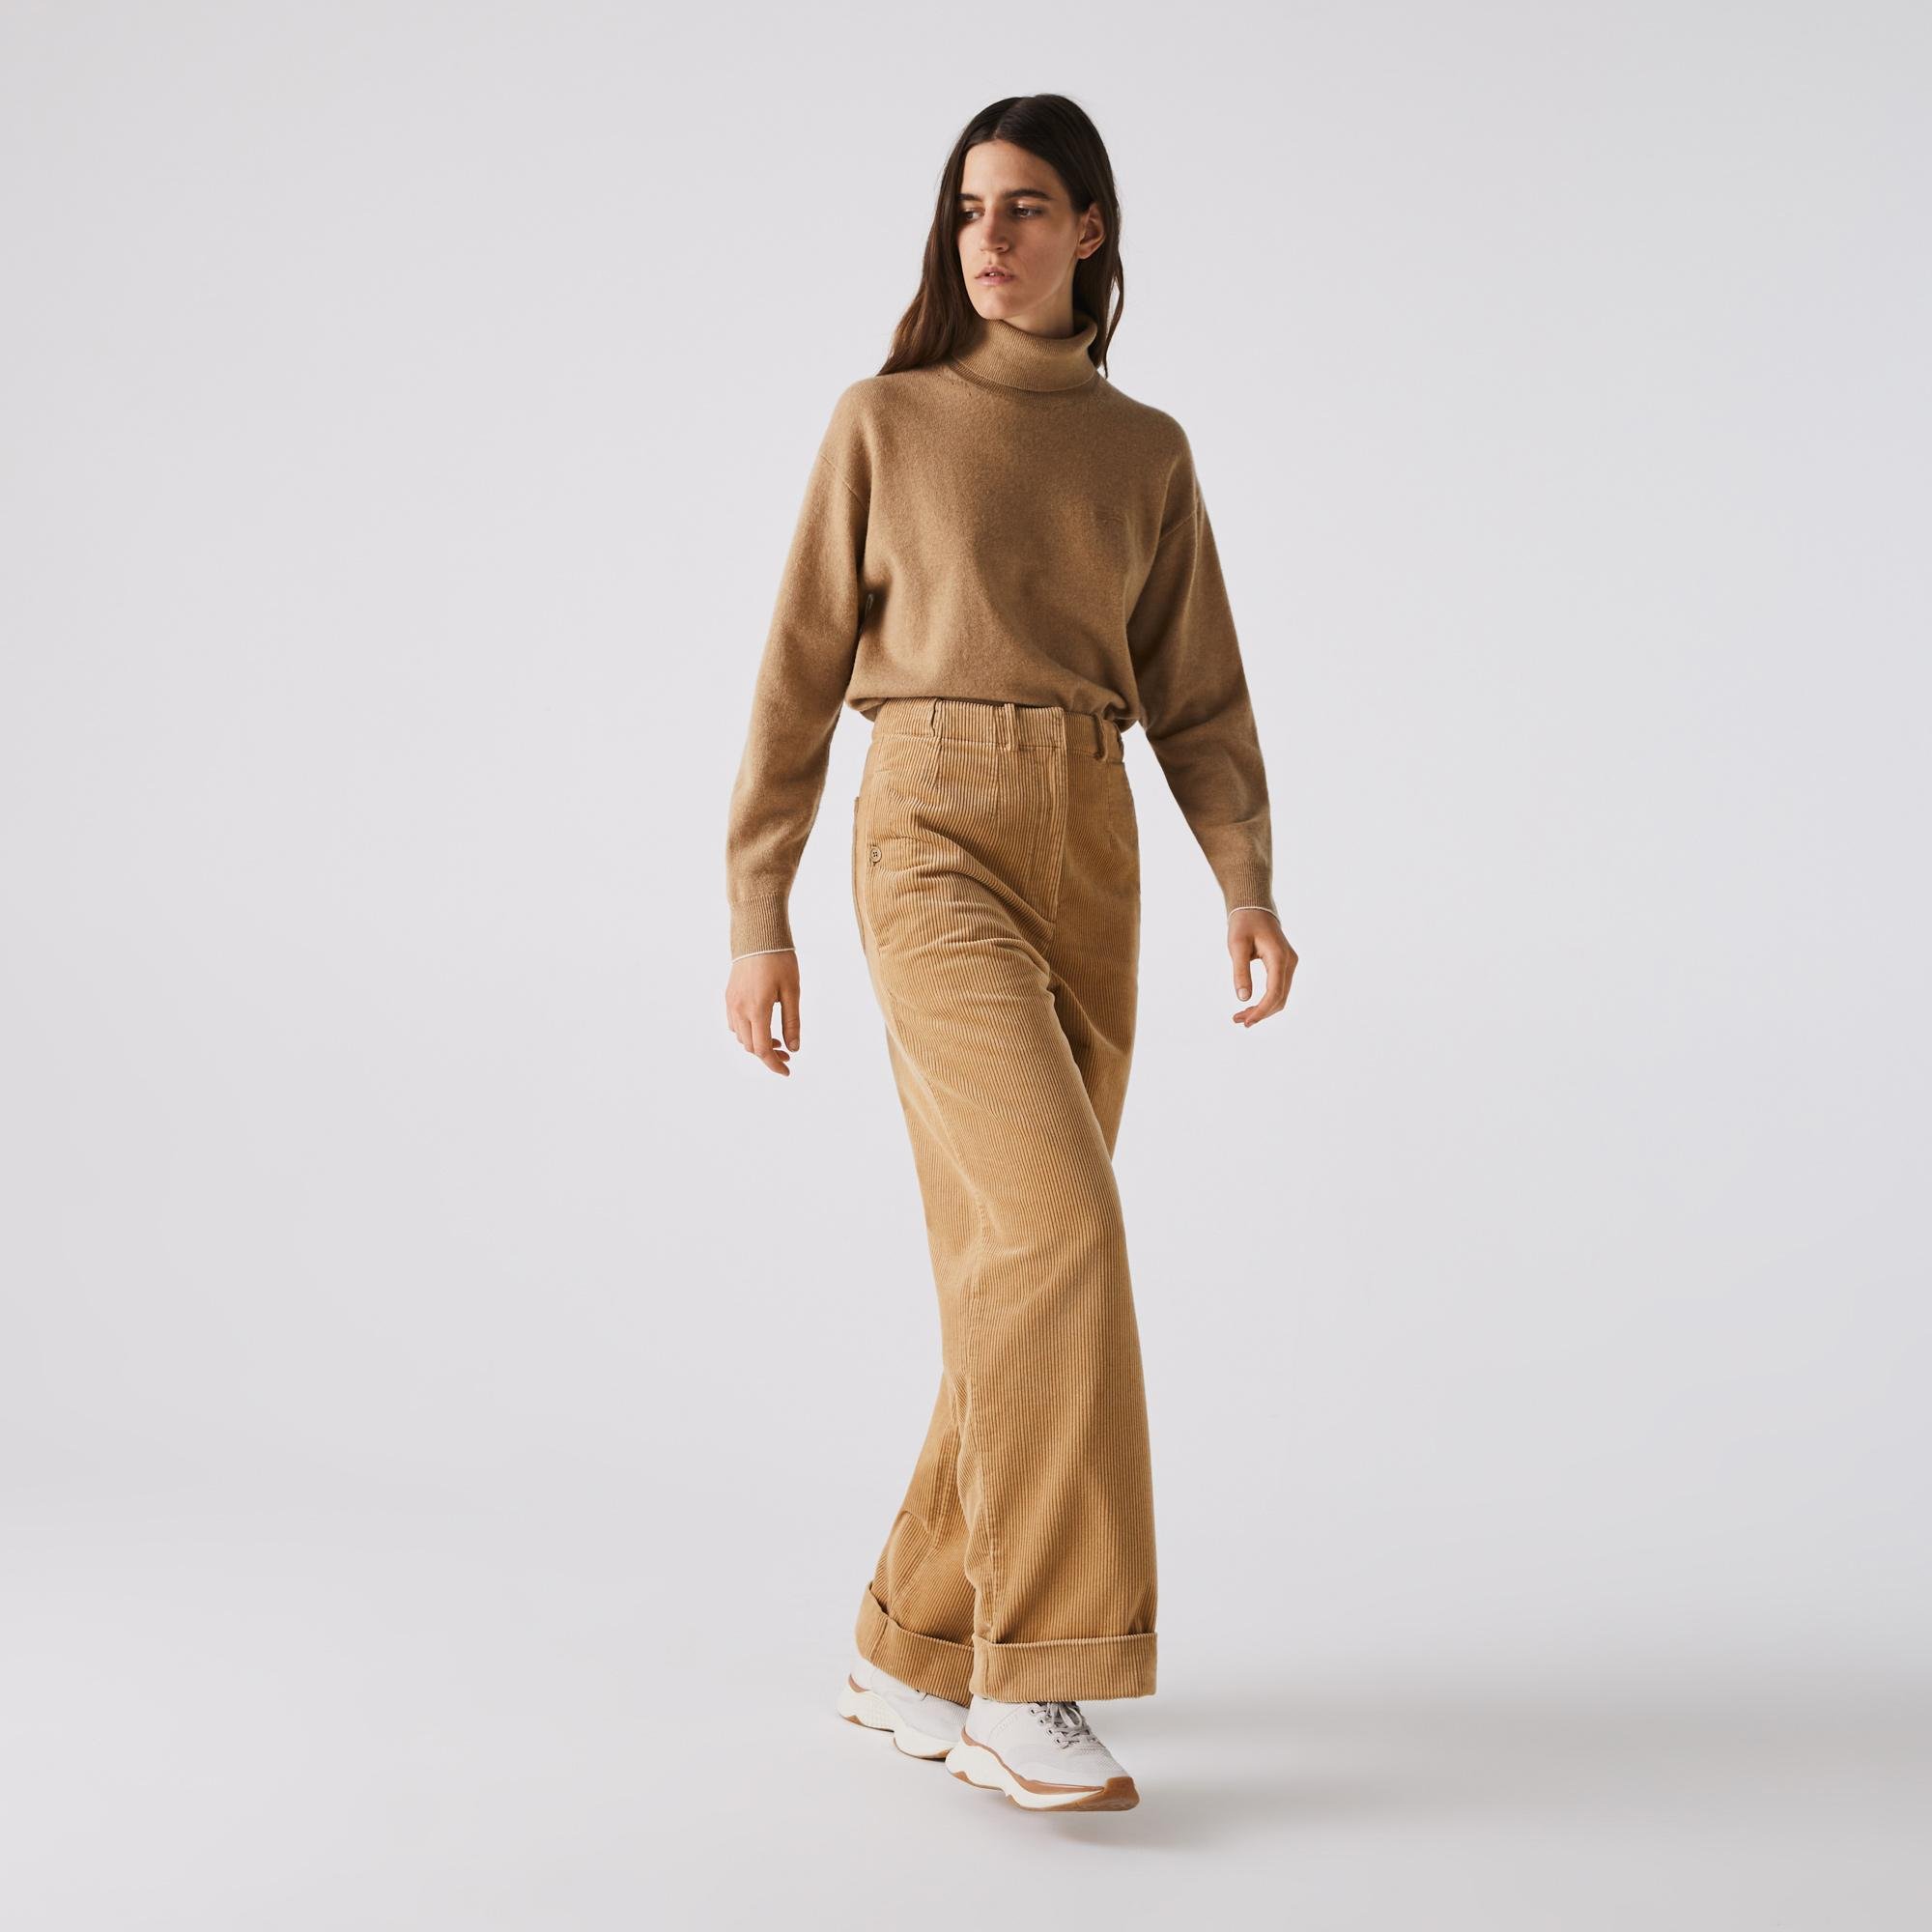 Lacoste L!VE check chino pants in beige | ASOS